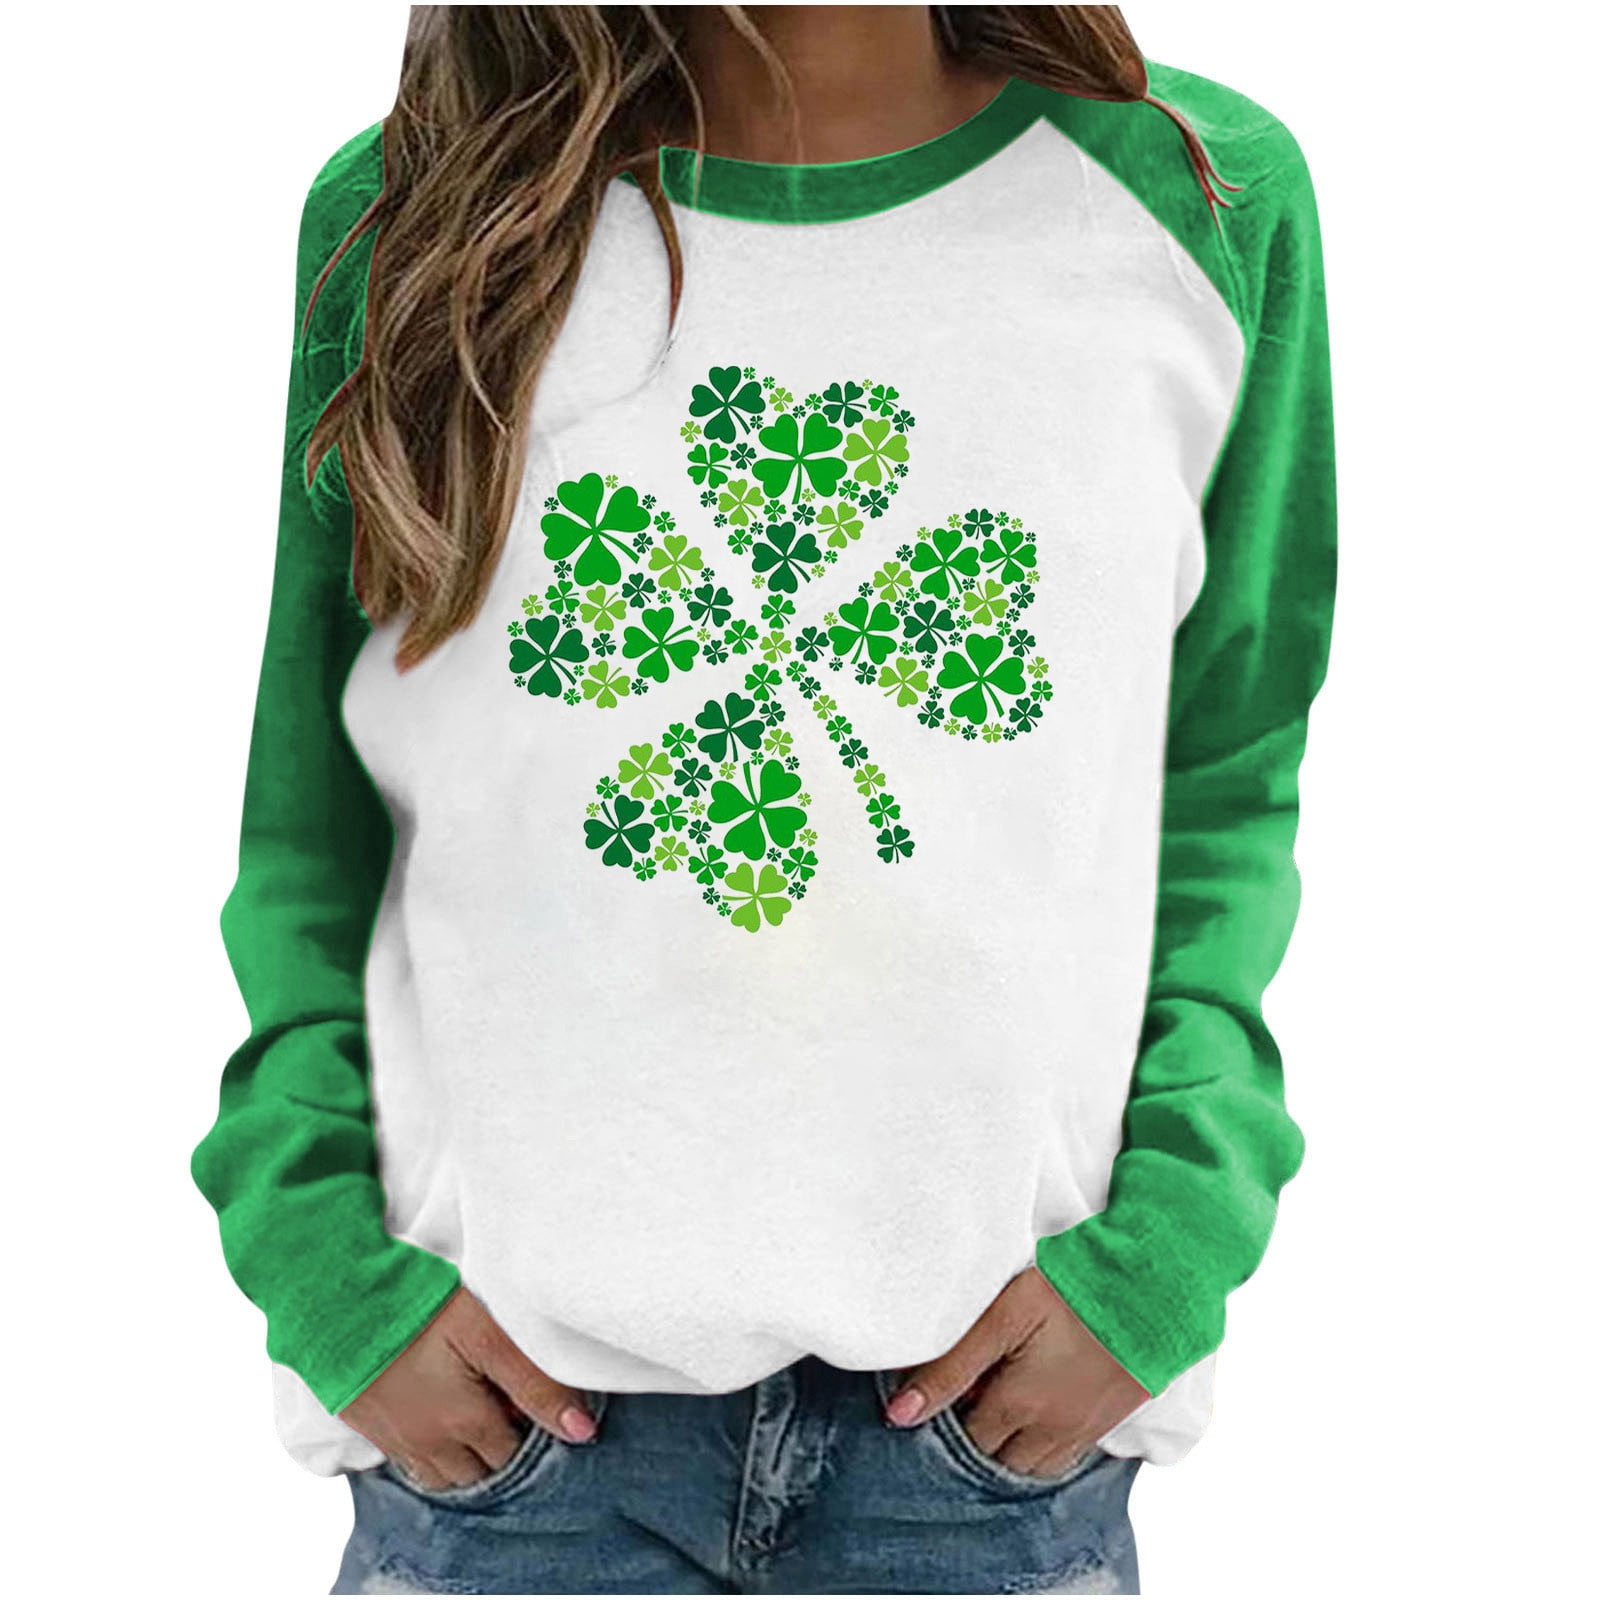 Deals of the Day!Taqqpue Long Sleeve St Patricks Day Shirts for Women ...